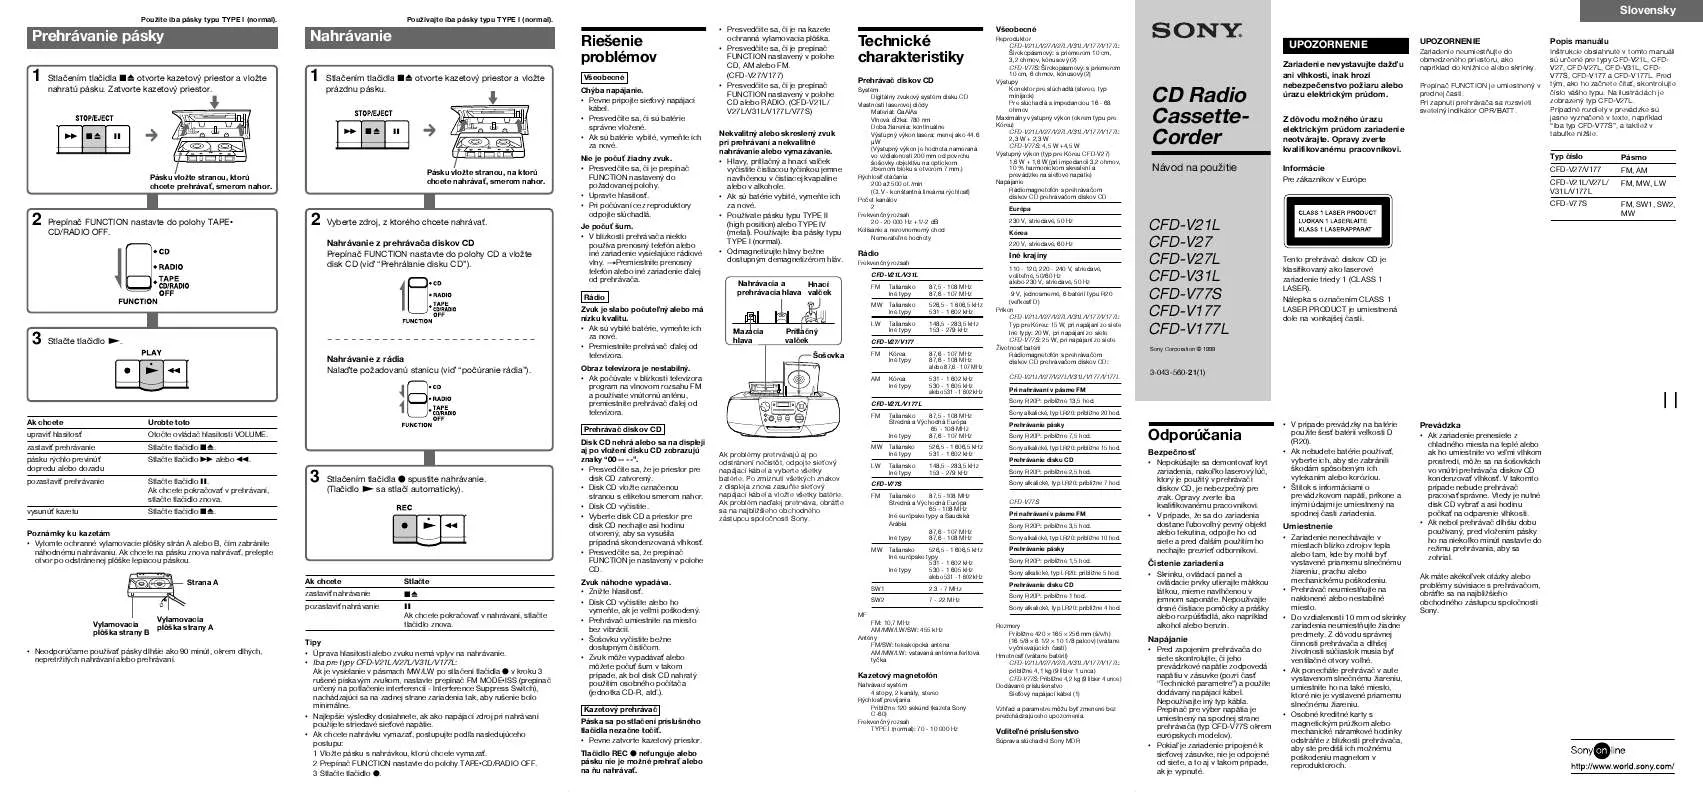 Mode d'emploi SONY CFD-V77S